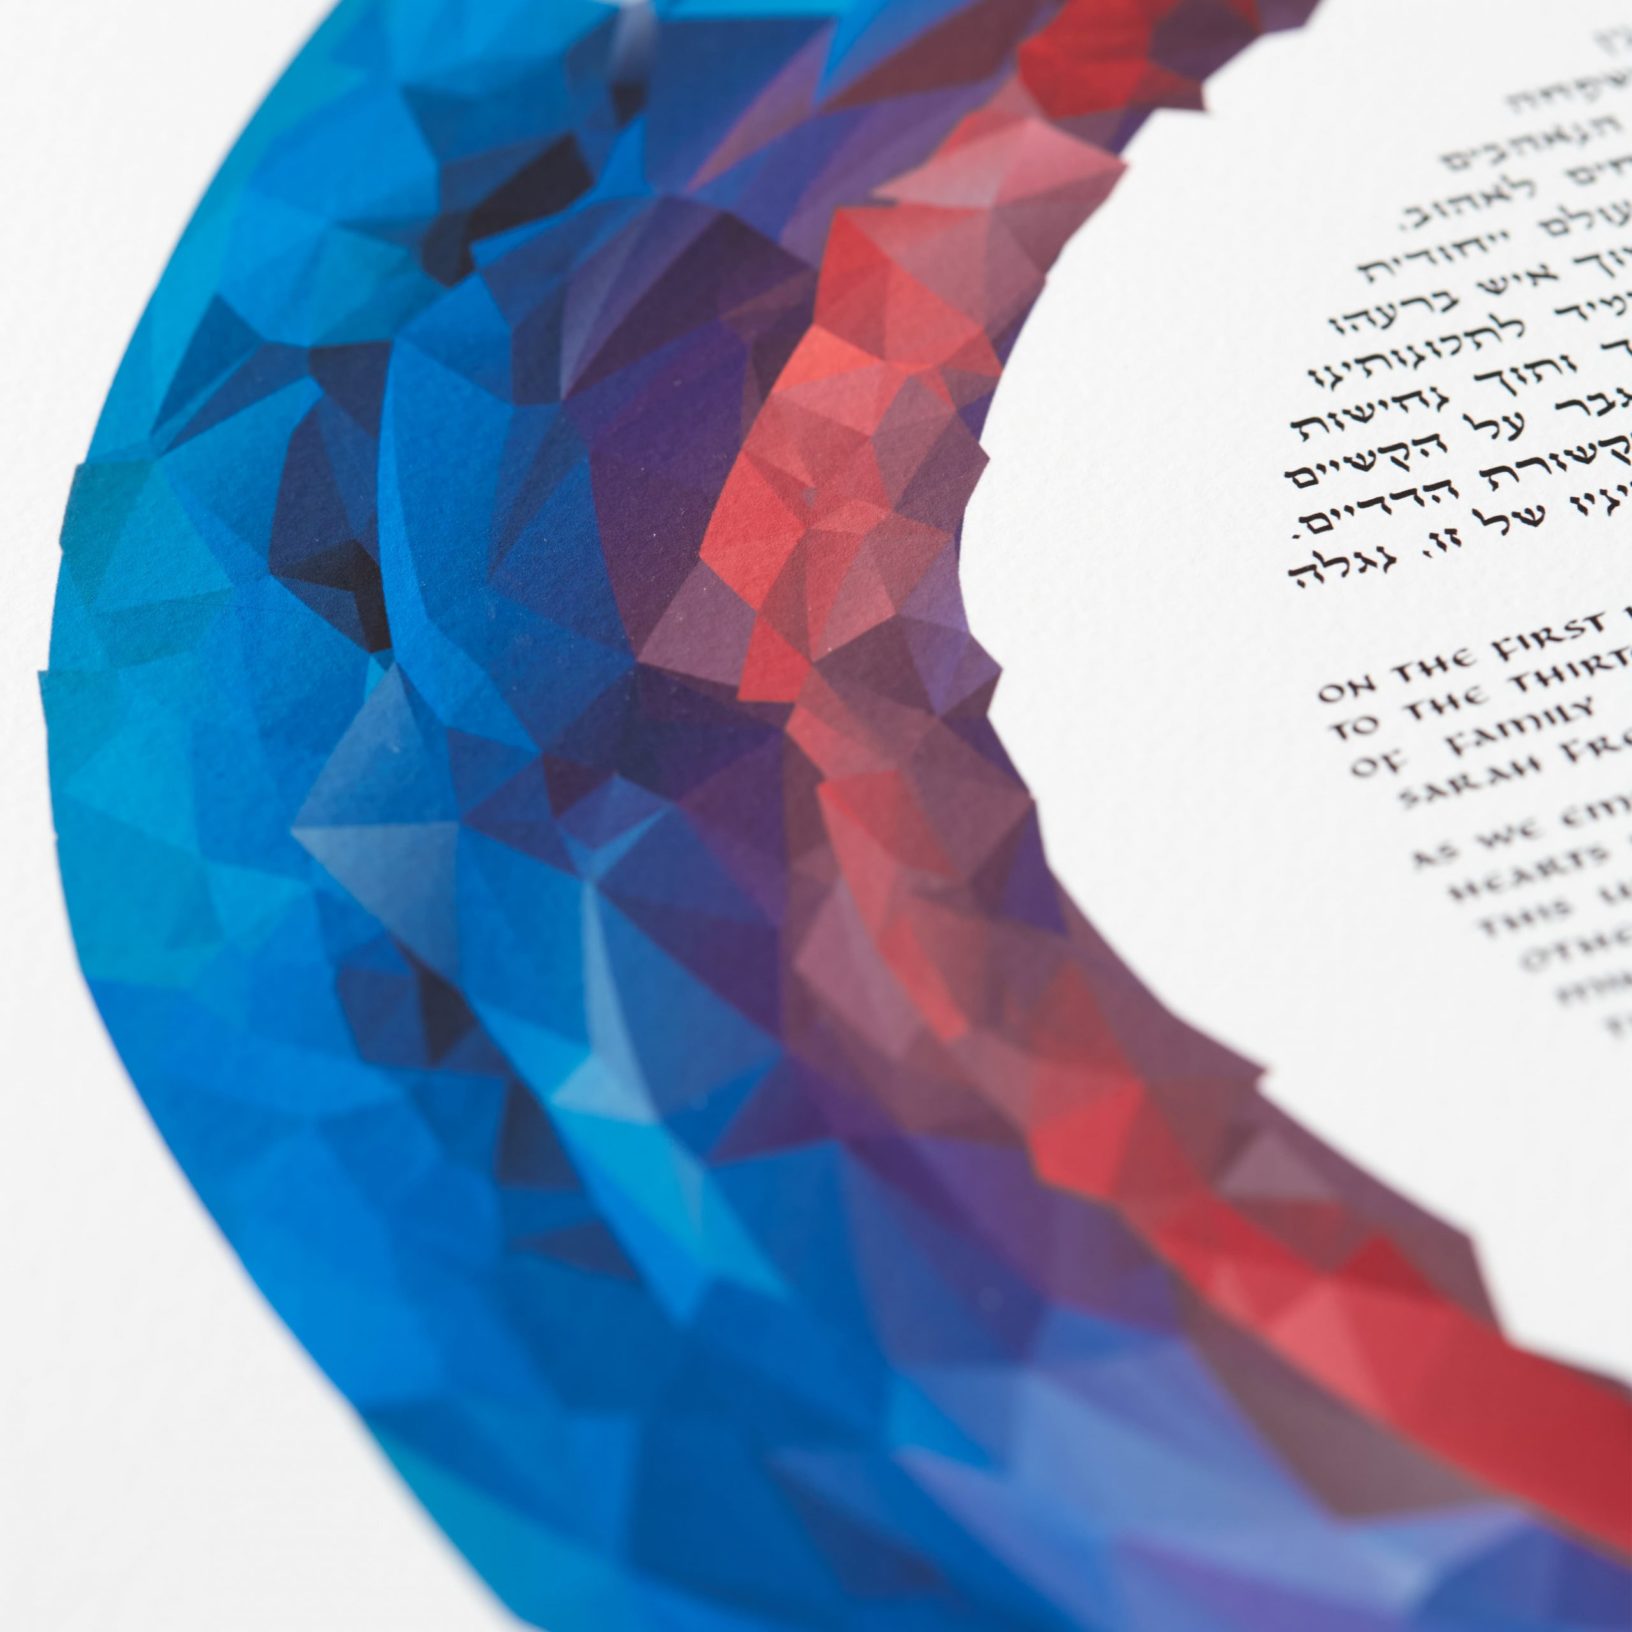 Sapphire Rose Ketubah Jewish Marriage Contracts by Ruth Mergi